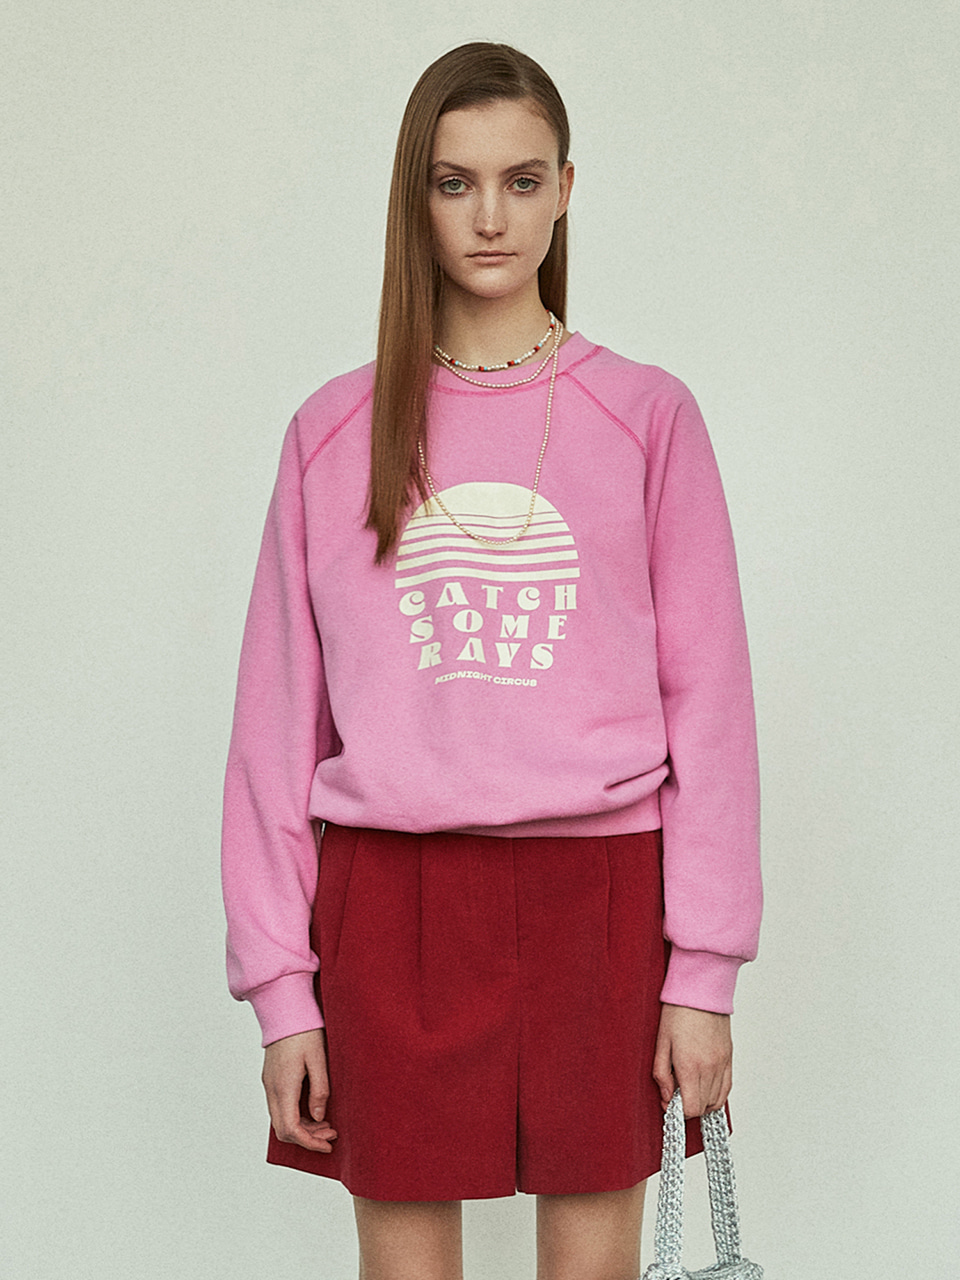 Catch Some Rays Sweatshirt in Pink